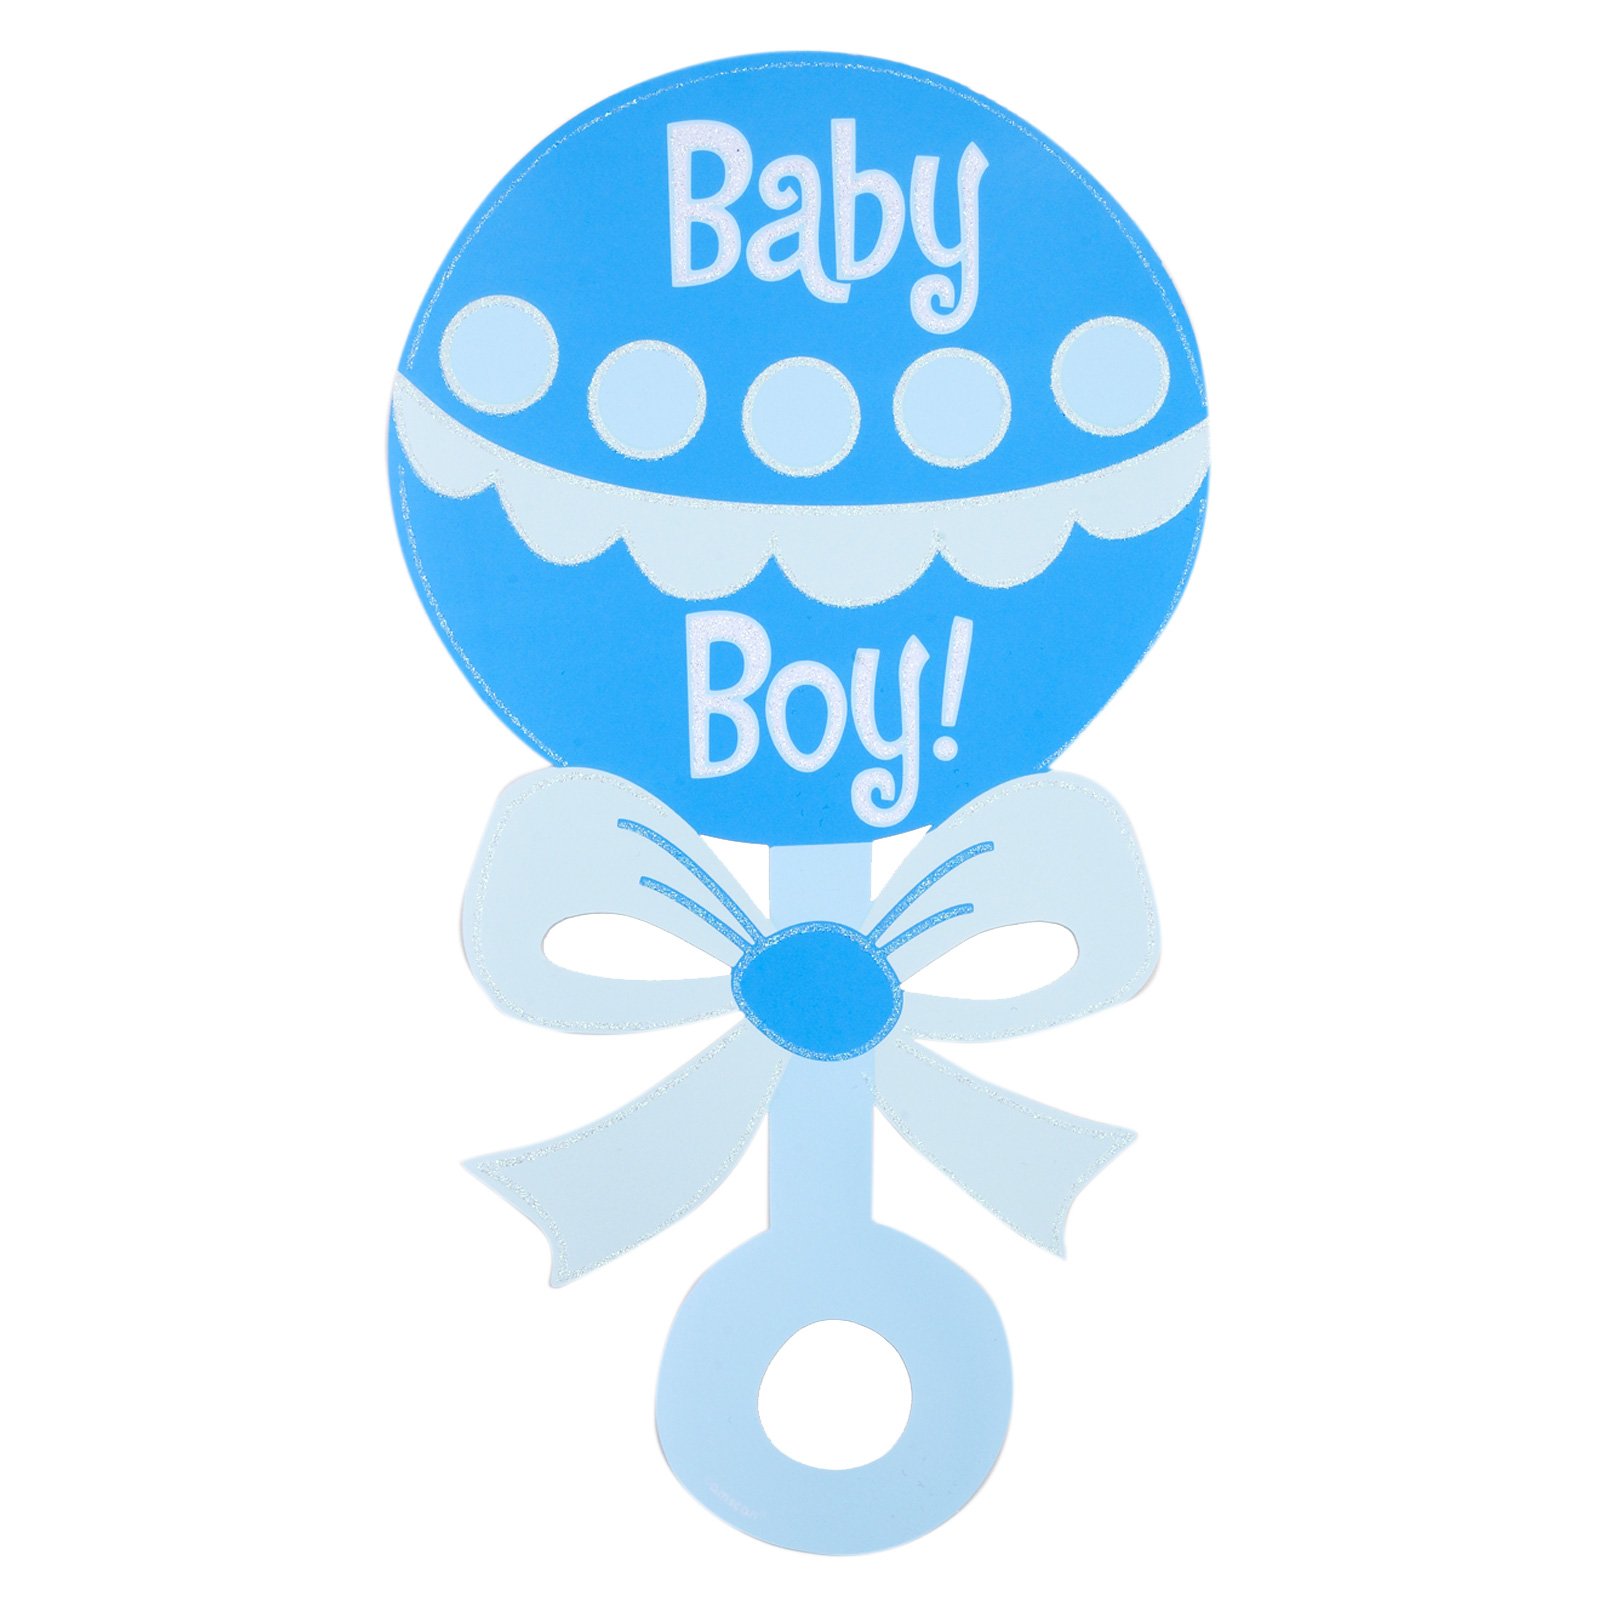 Baby Boy Clip Art to Download - dbclipart.com